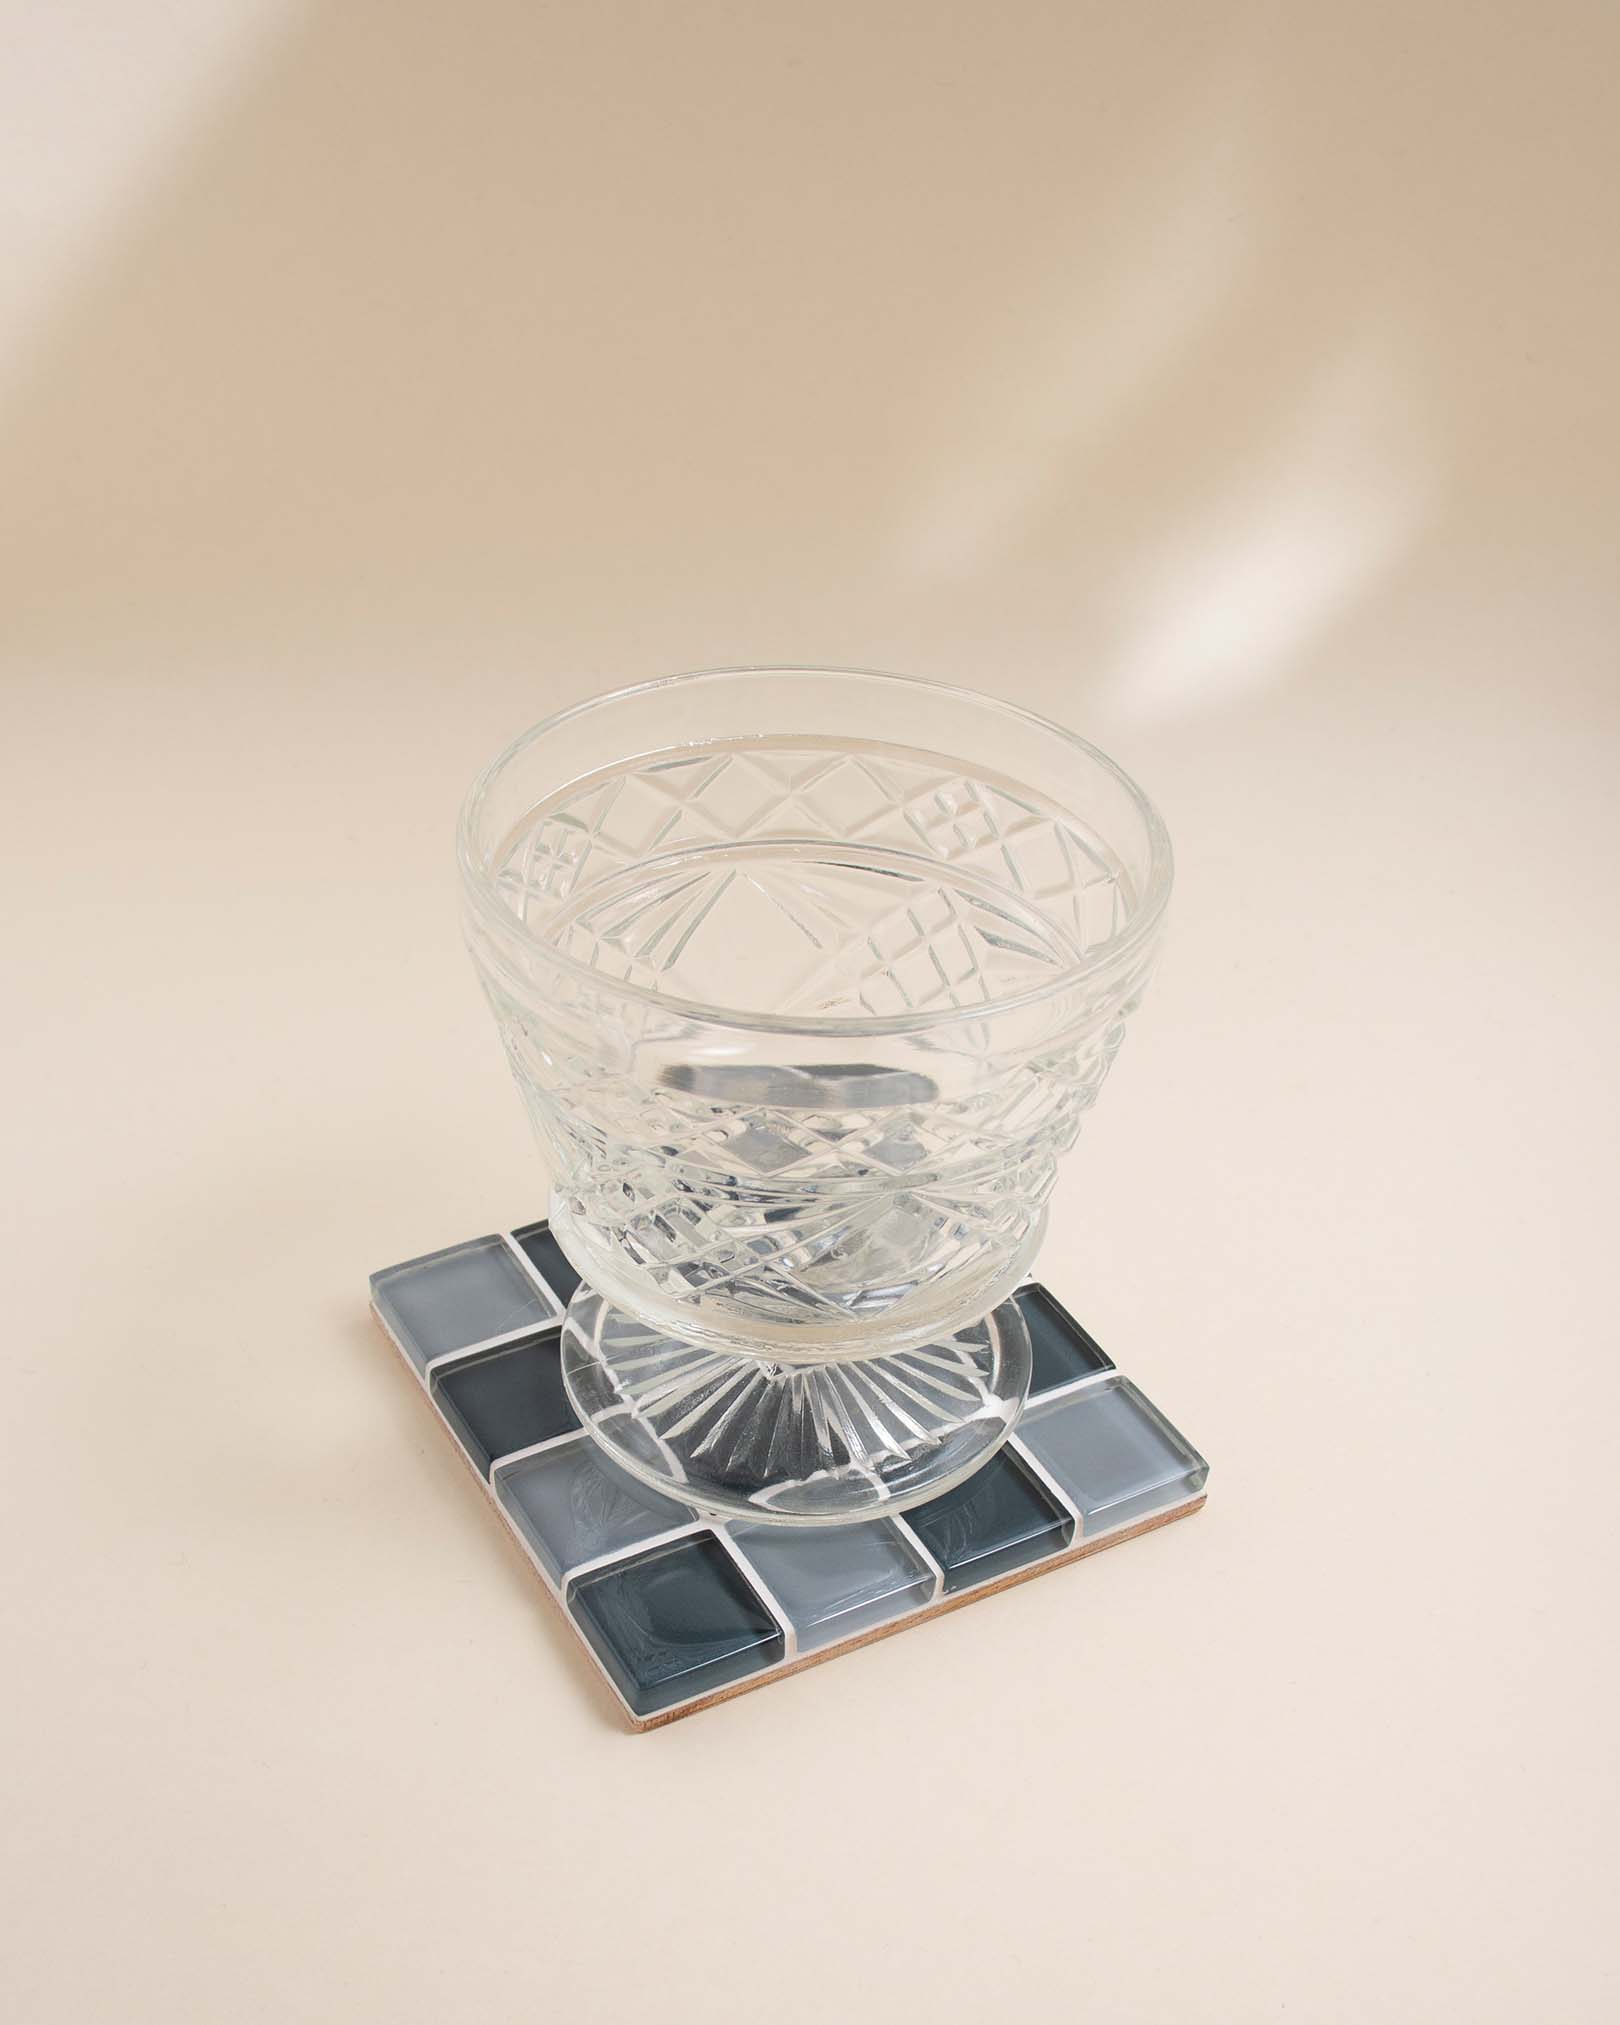 GLASS TILE COASTER - That's Fate